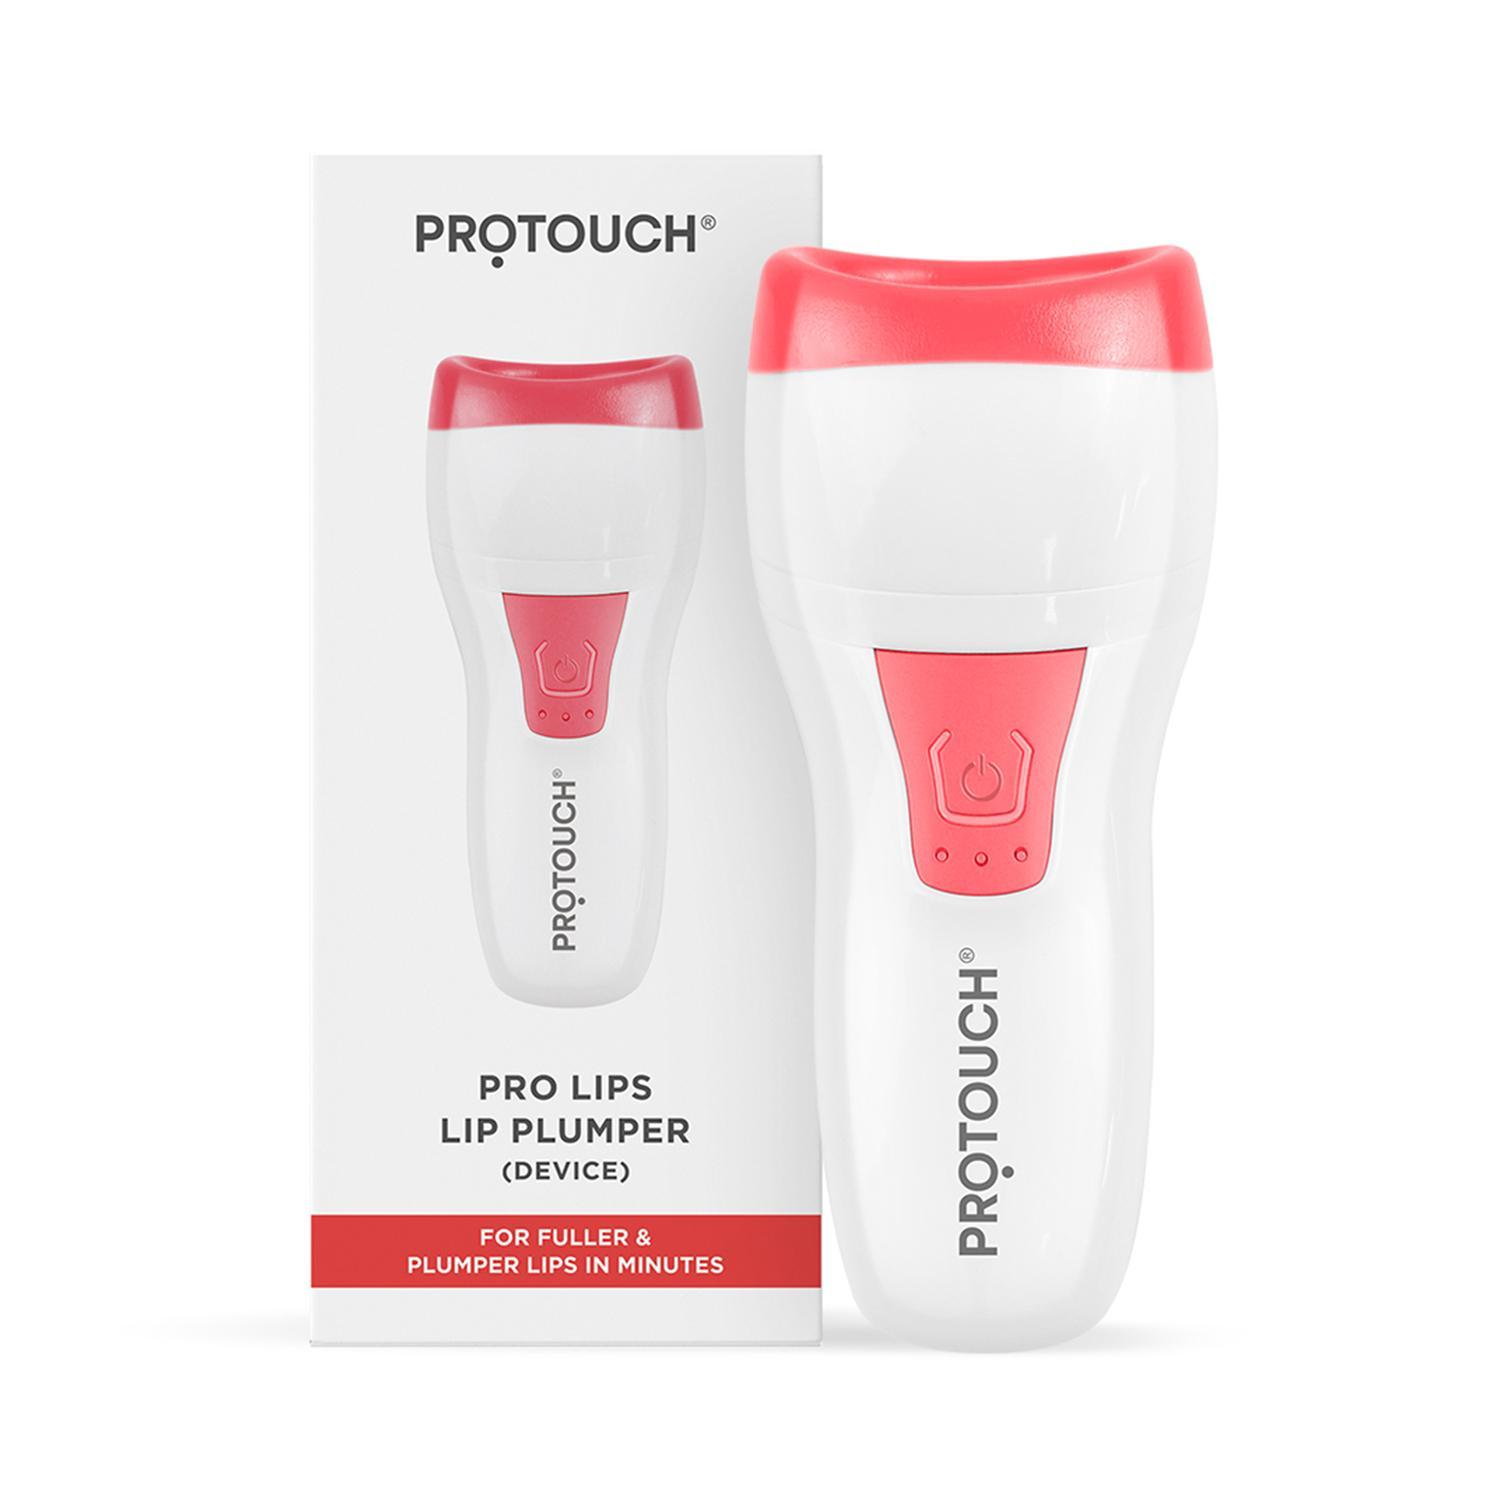 protouch pro lips lip plumper device - red and white